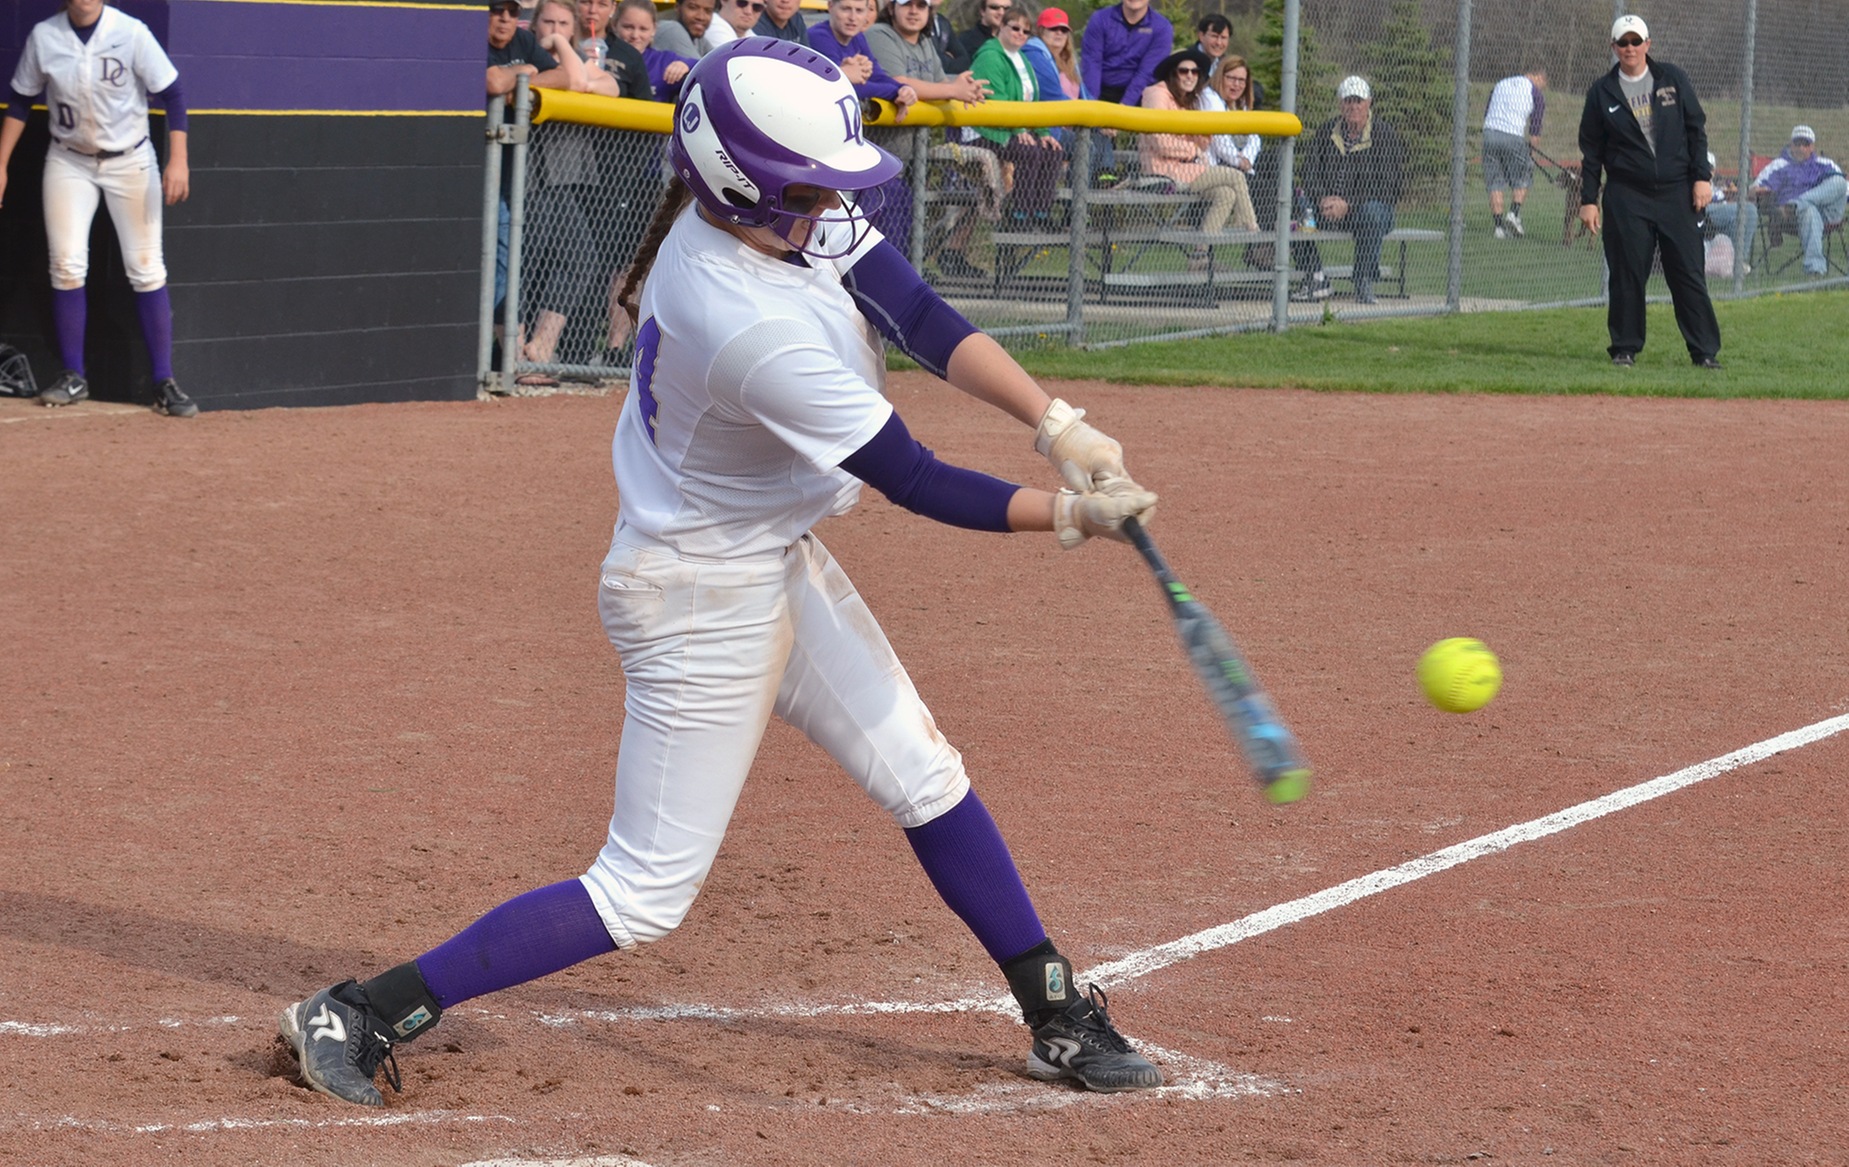 Yellow Jackets Fall in HCAC Tourney Opener